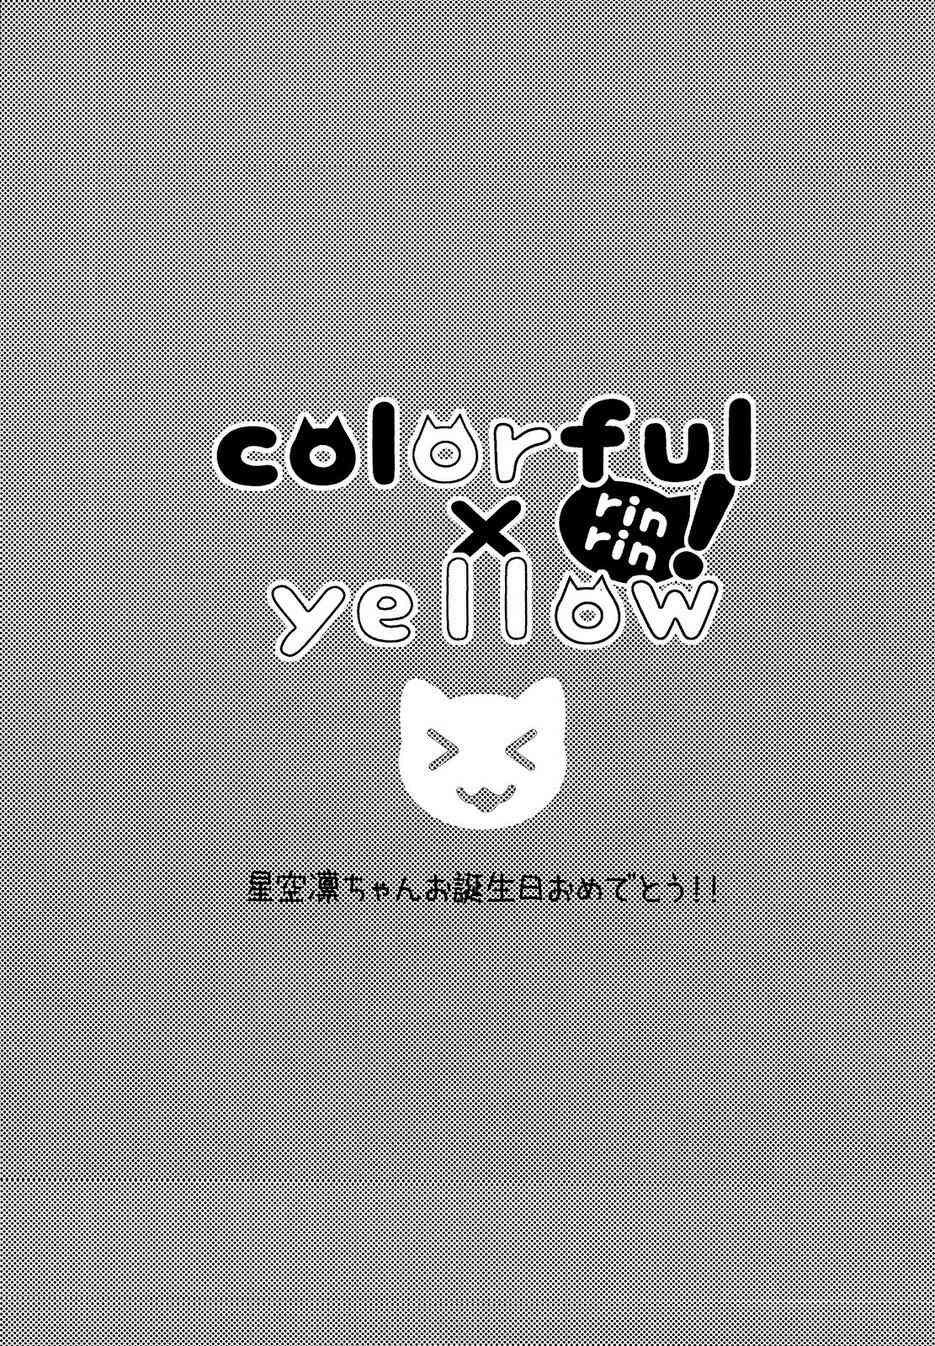 LoveLive - Colorful X Yellow - 7